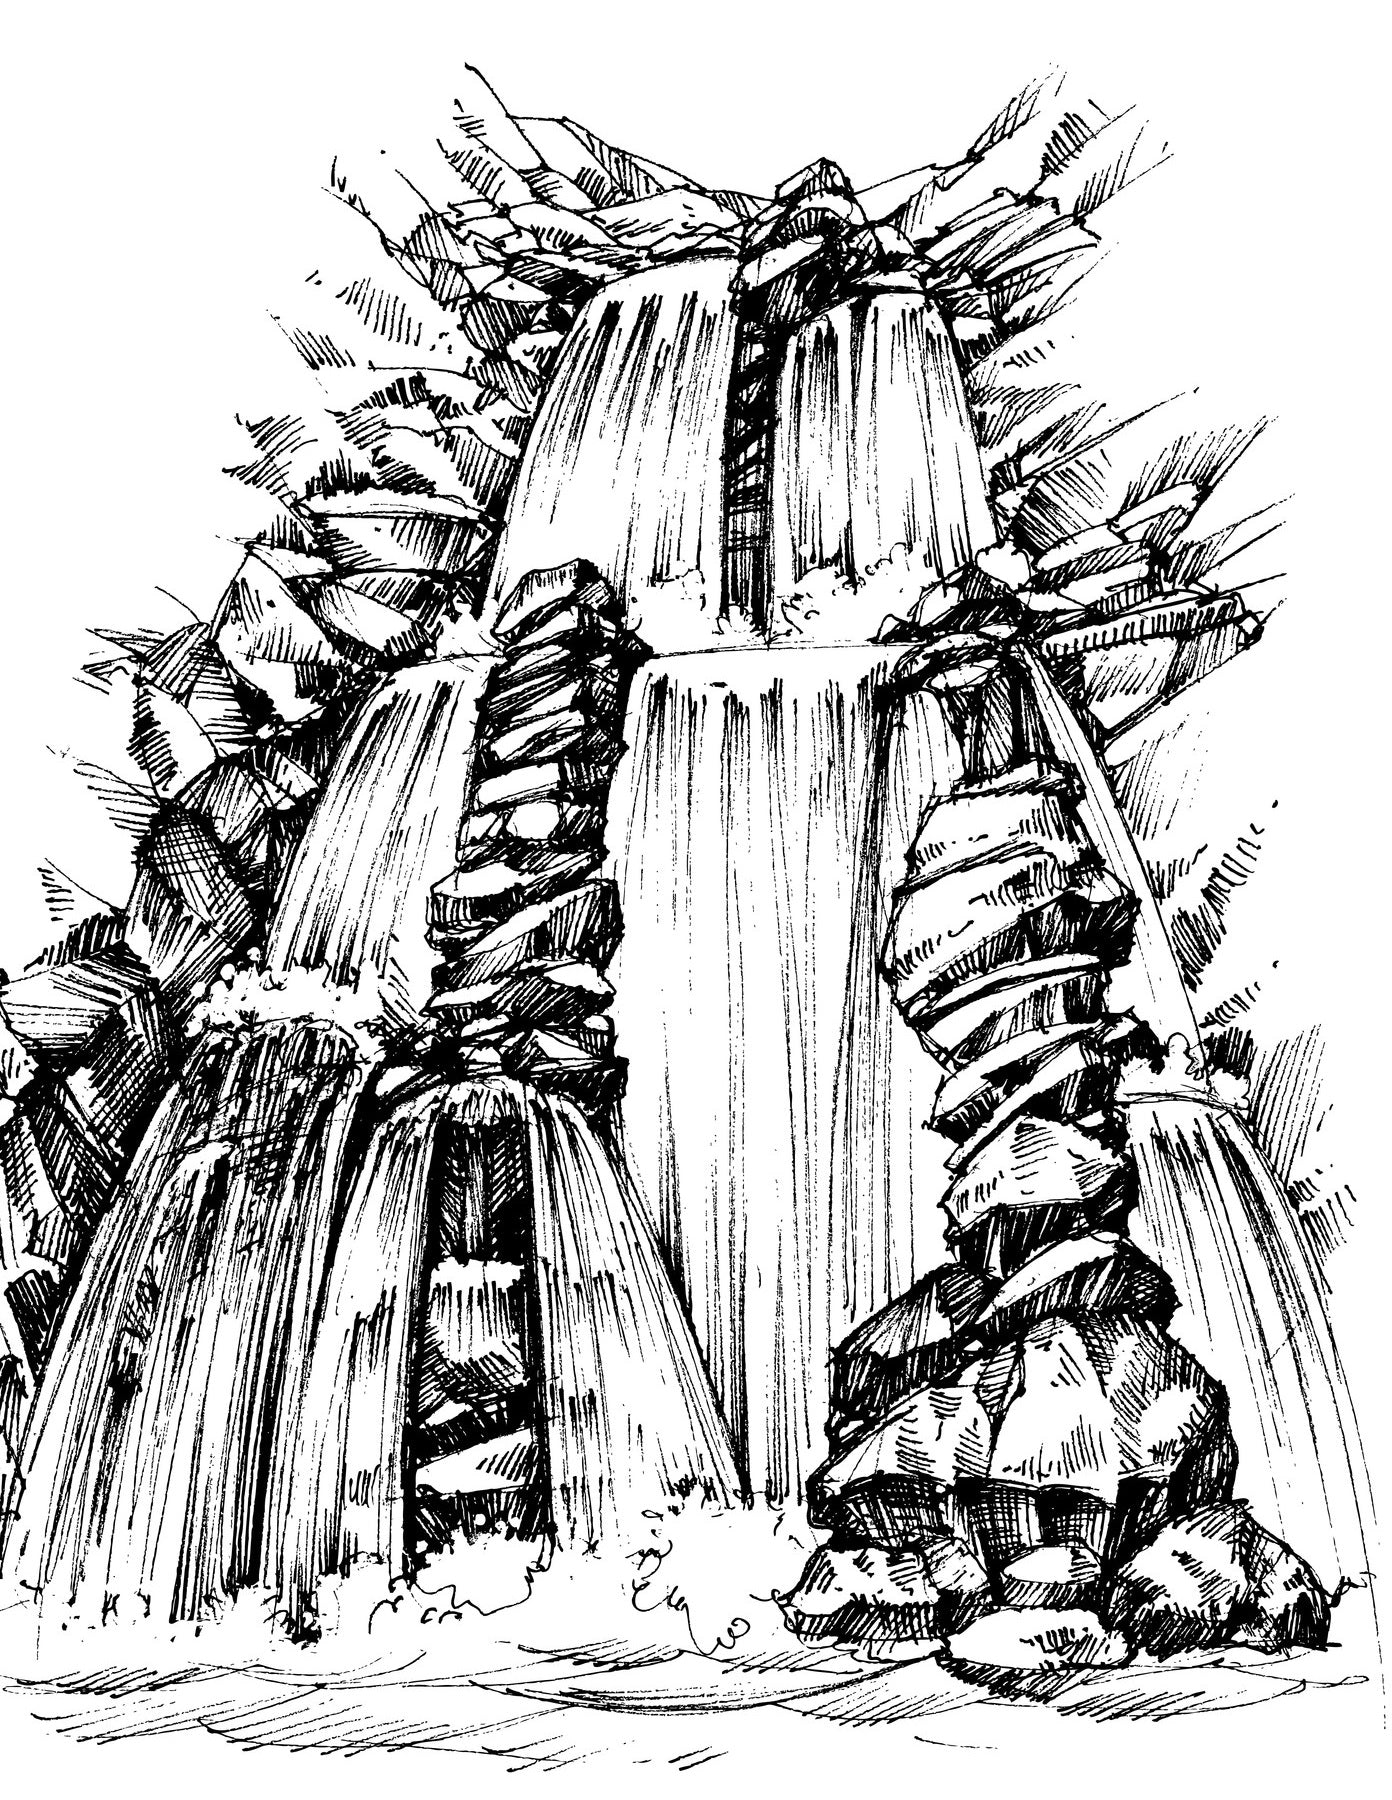 Waterfalls - Majestic Cliffs and River Landscapes, Nature Sketches, PDF Coloring Book 